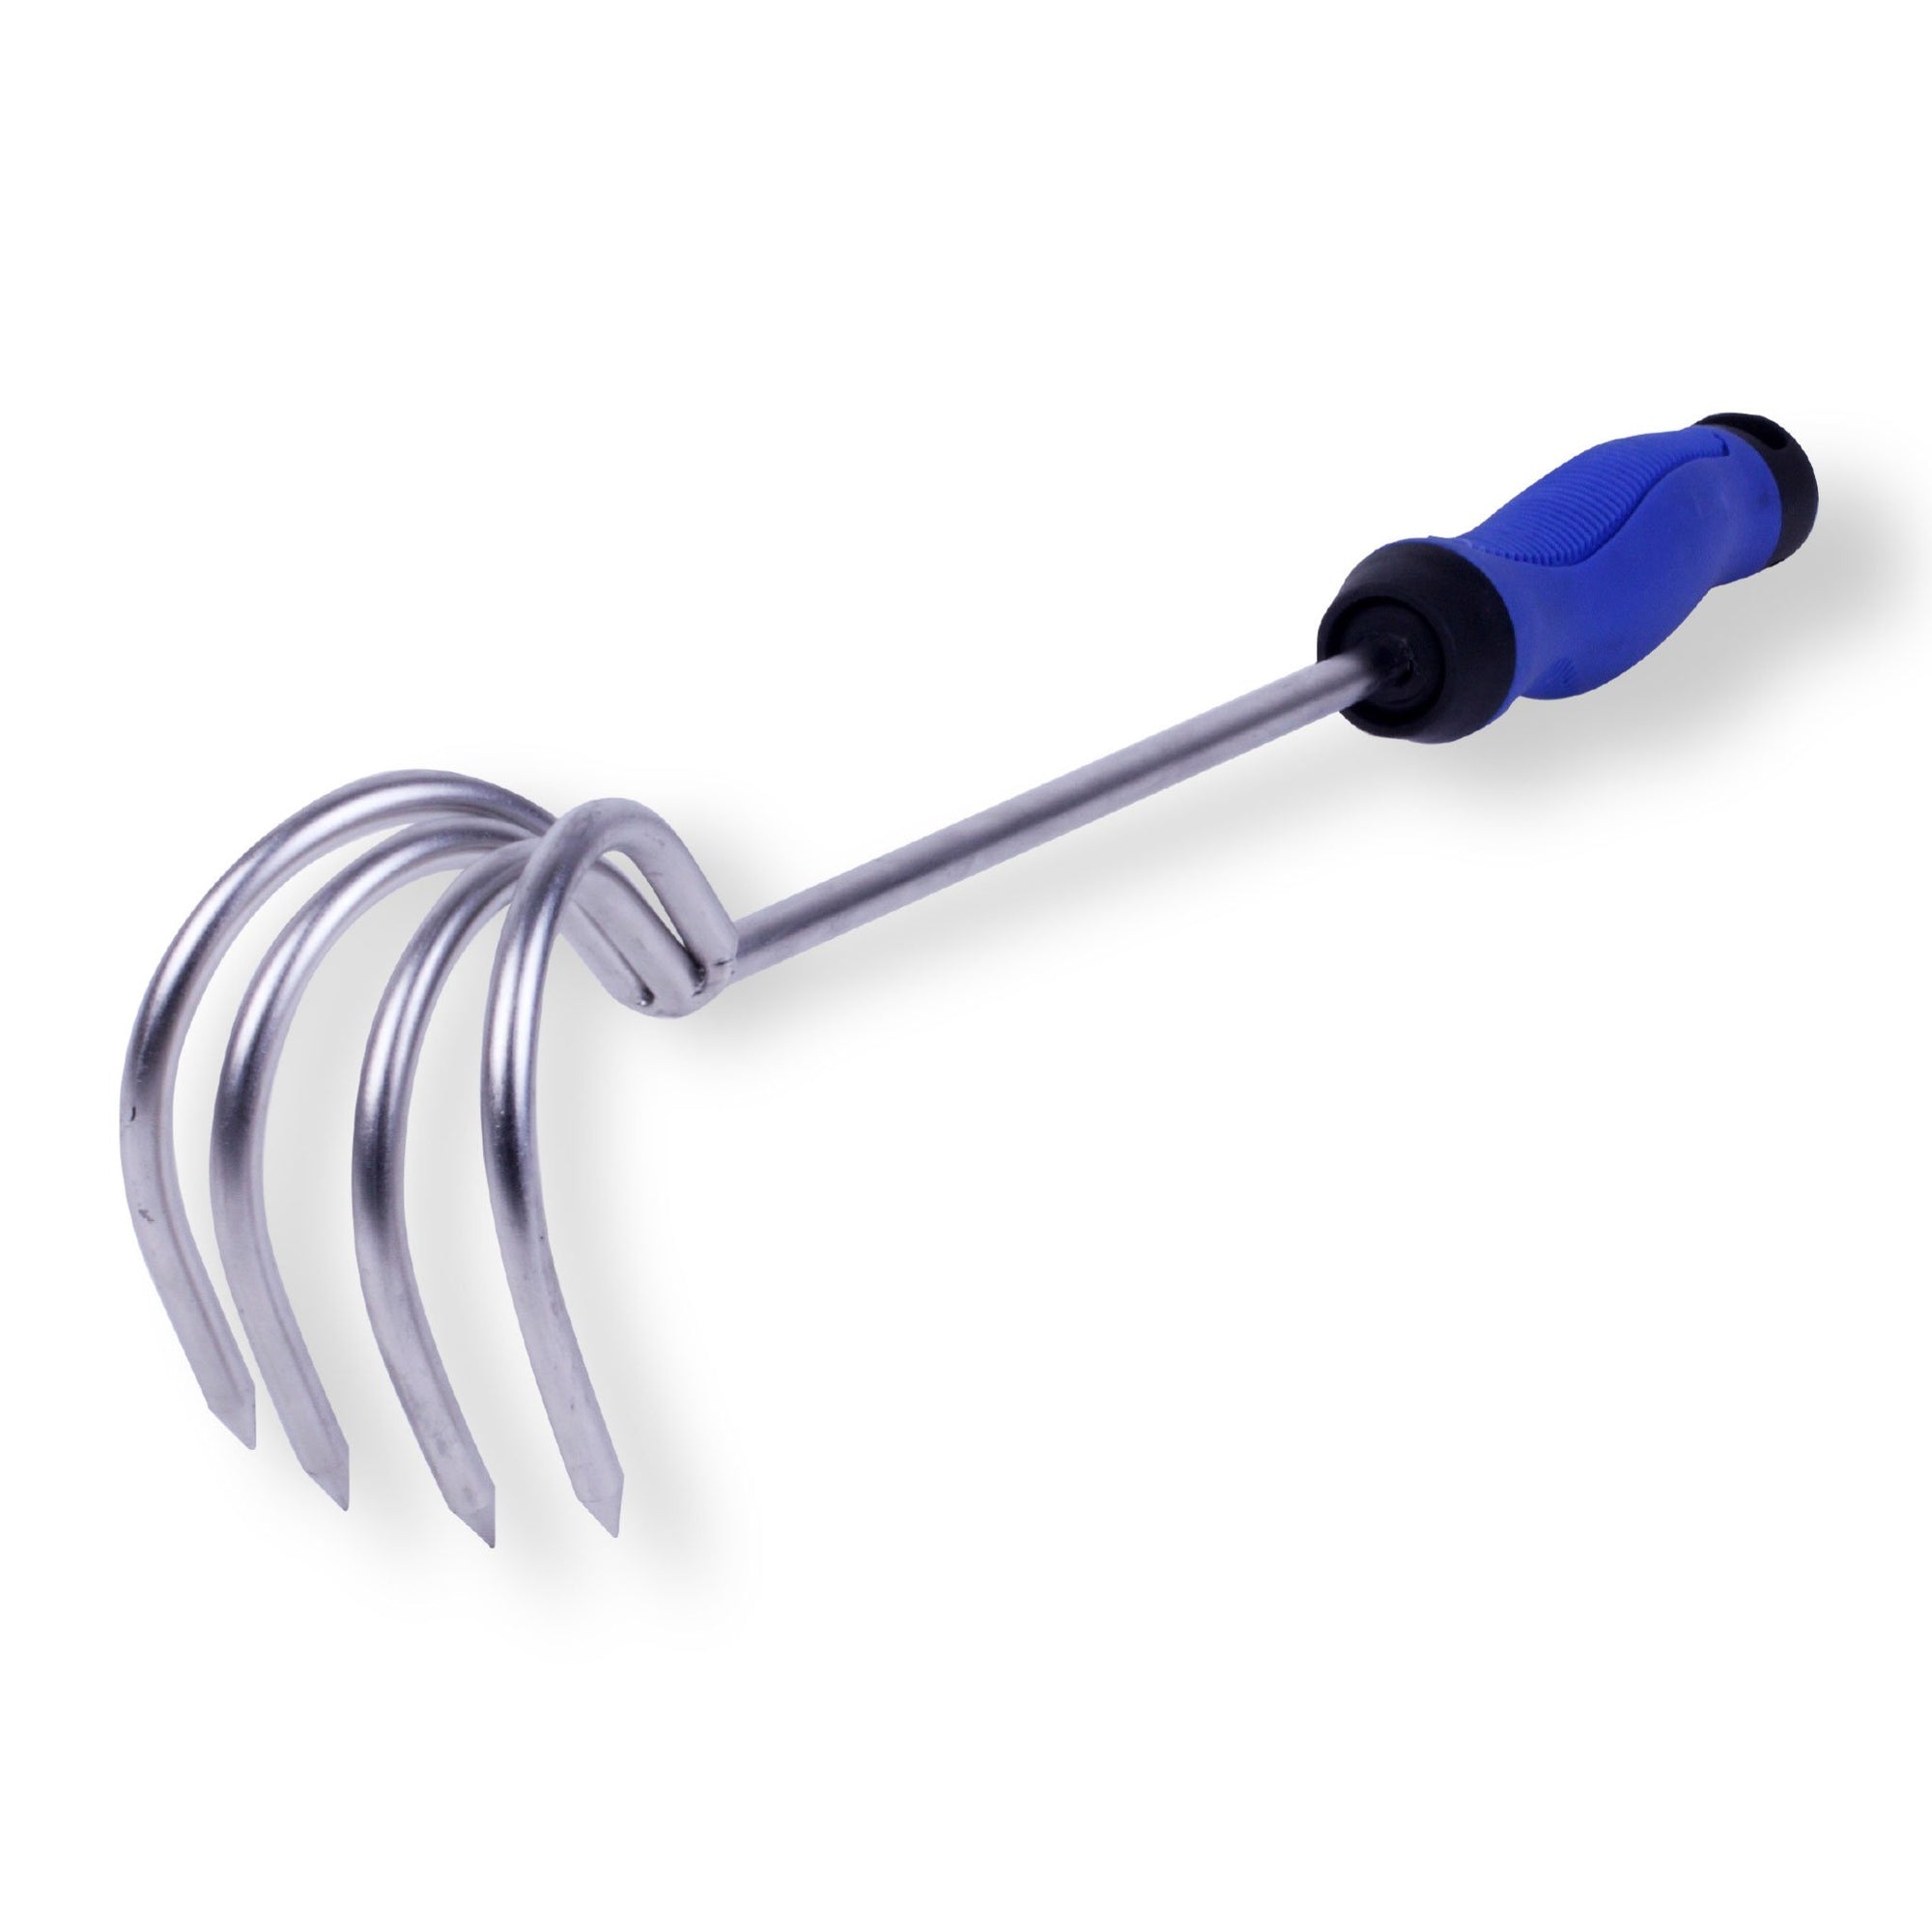 Stainless Steel Heavy Duty Shellfish Claw